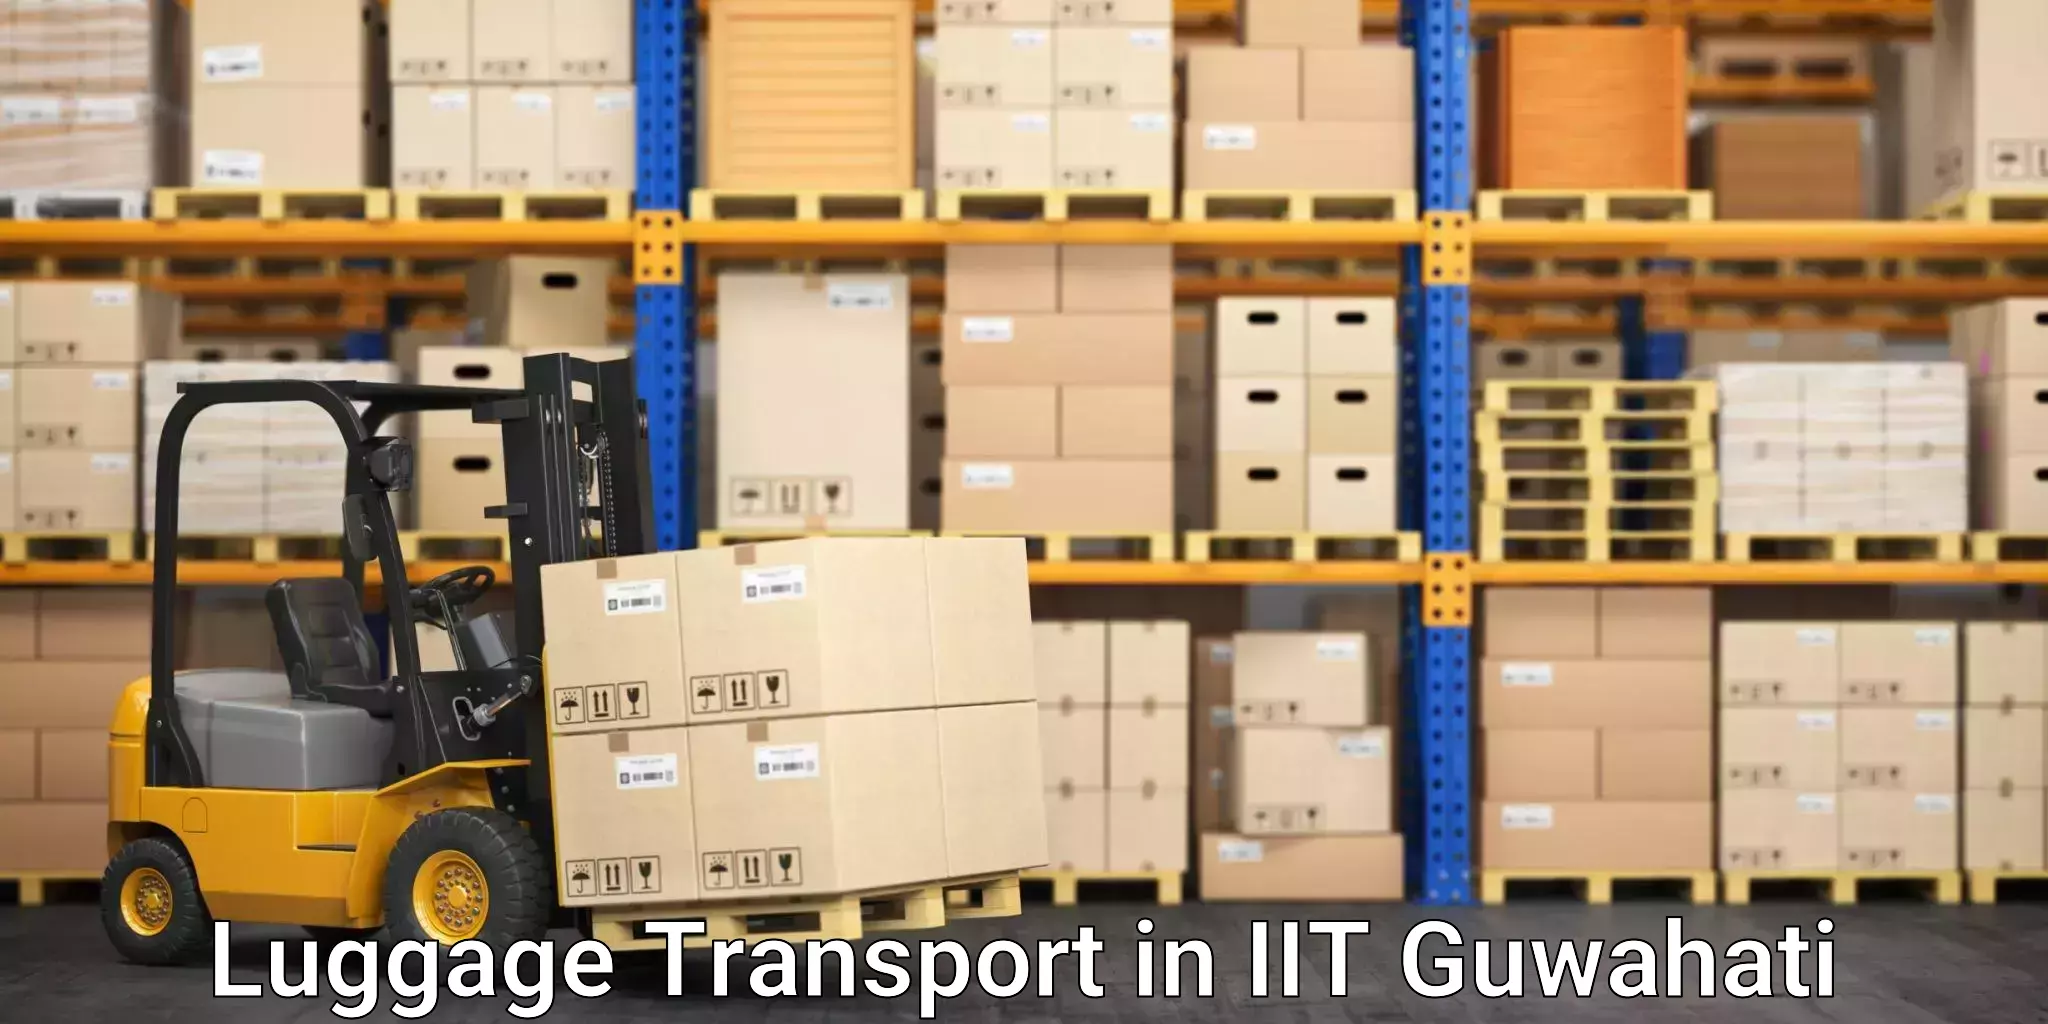 Baggage transport services in IIT Guwahati